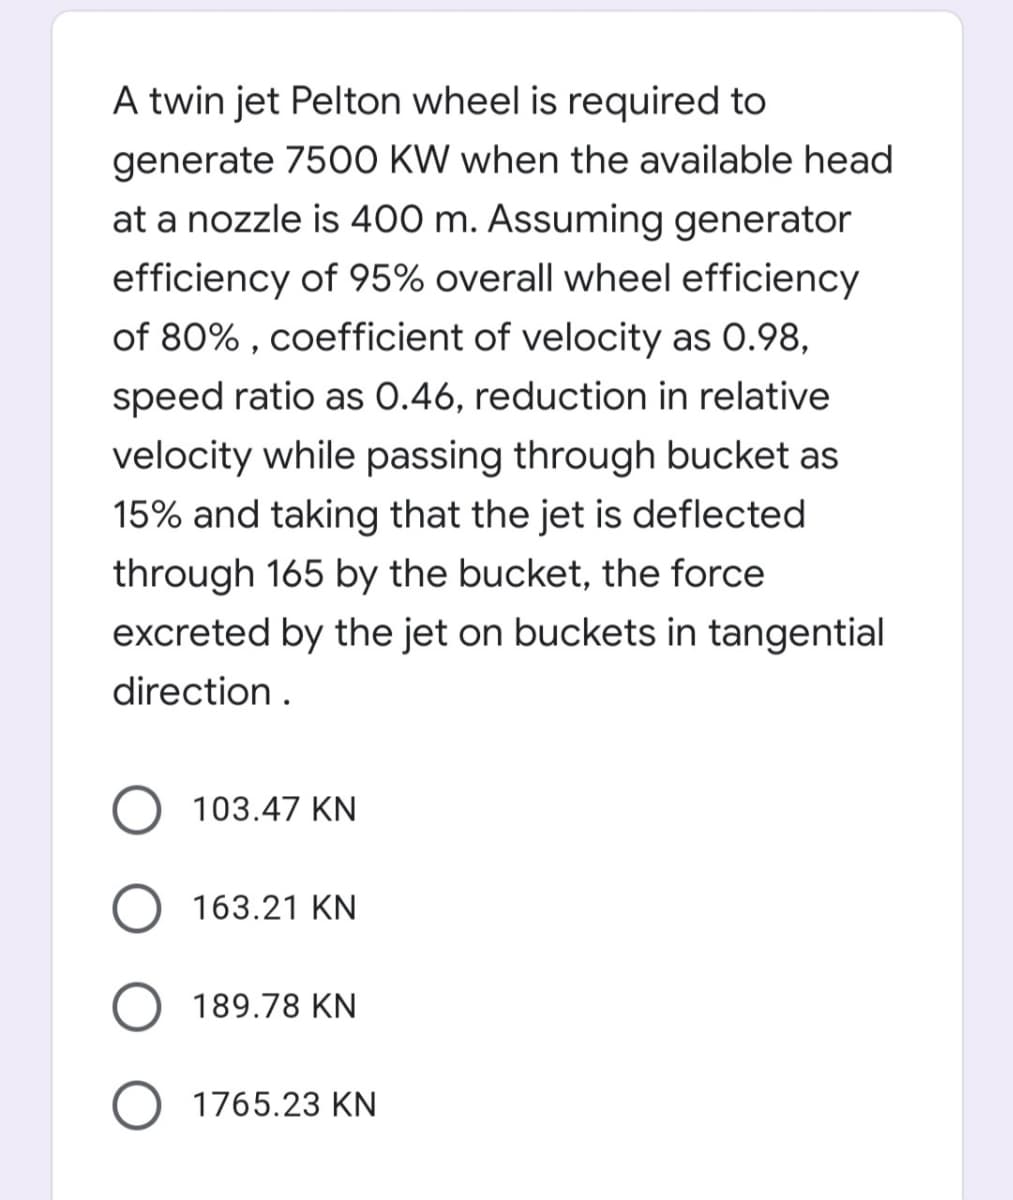 A twin jet Pelton wheel is required to
generate 7500 KW when the available head
at a nozzle is 400 m. Assuming generator
efficiency of 95% overall wheel efficiency
of 80% , coefficient of velocity as 0.98,
speed ratio as 0.46, reduction in relative
velocity while passing through bucket as
15% and taking that the jet is deflected
through 165 by the bucket, the force
excreted by the jet on buckets in tangential
direction.
103.47 KN
163.21 KN
189.78 KN
1765.23 KN
